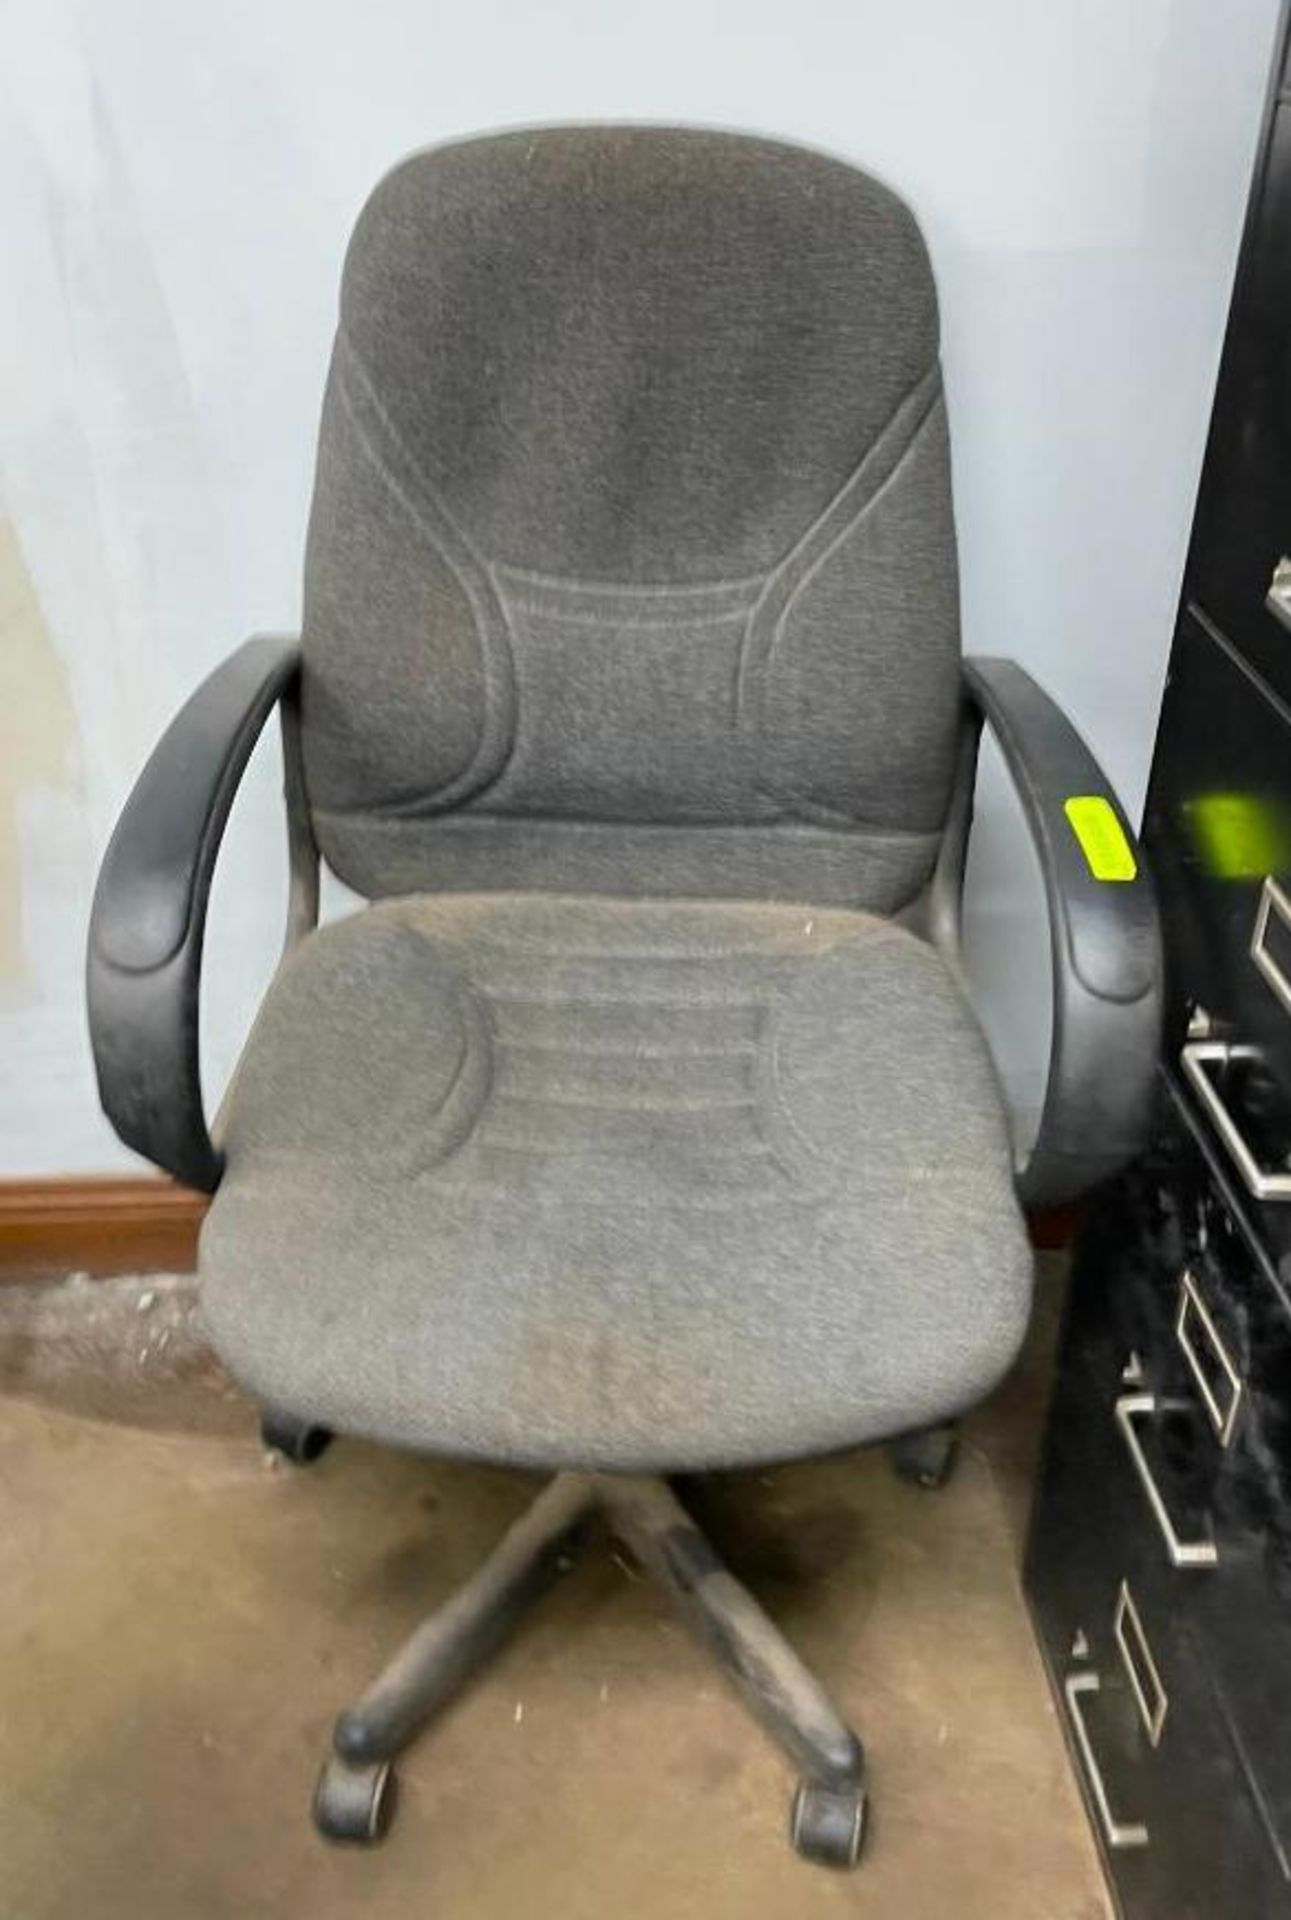 DESCRIPTION: ROLLABOUT OFFICE CHAIR LOCATION: OFFICE QTY: 1